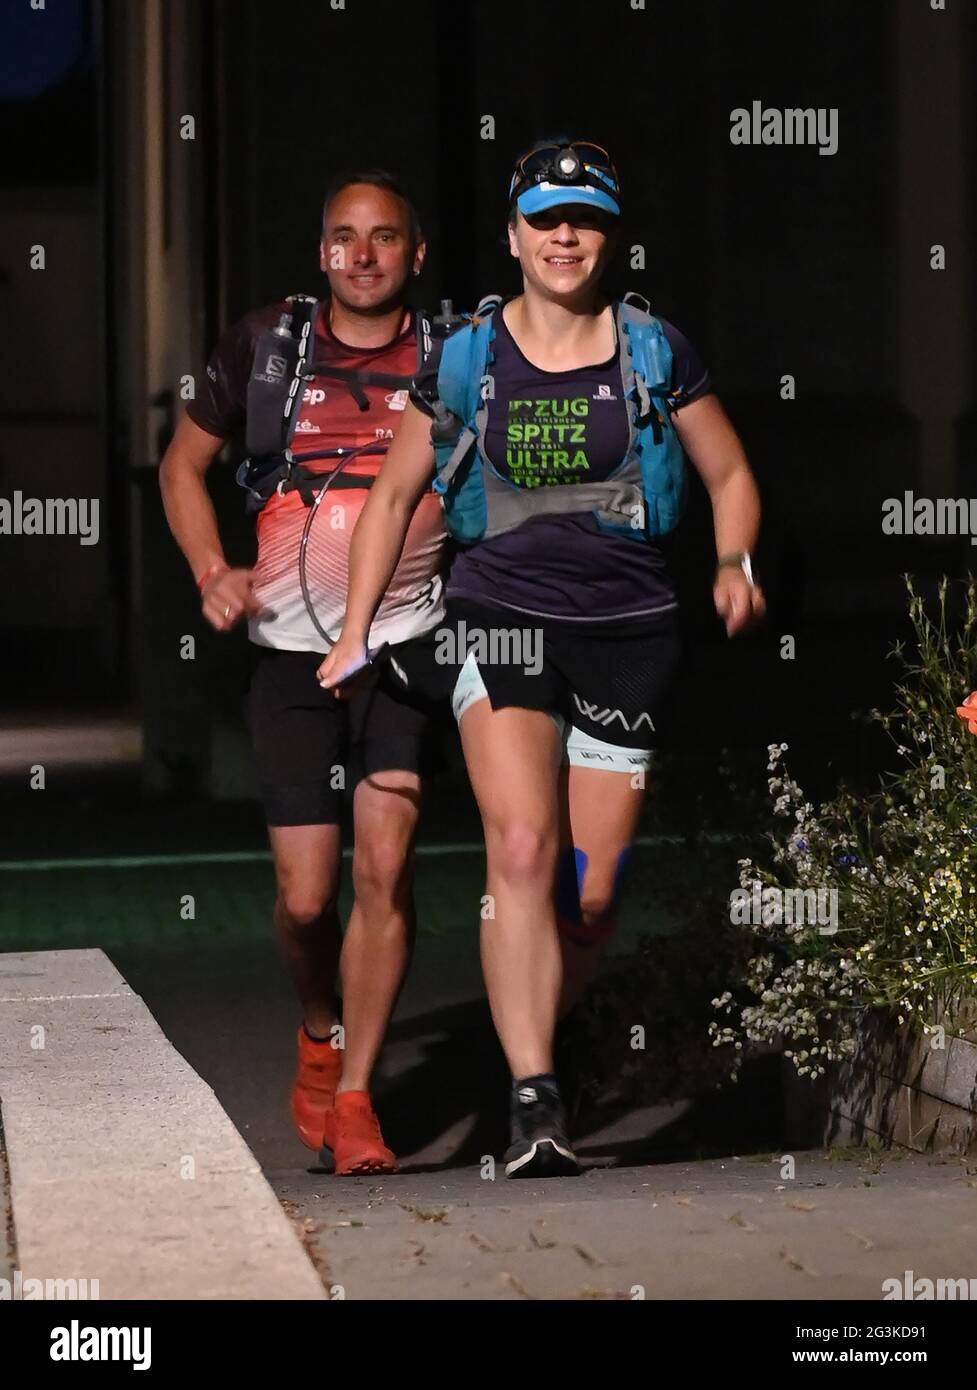 Fellbach, Germany. 17th June, 2021. Extreme athlete Steffi Saul (r) starts a 250-km charity run with her fellow runner Erwin Bauer (l) along the entire Remstal Trail to the Olgahospital in Stuttgart. Their goal is to collect donations for the hospital's children's cancer ward. (to dpa: 'Extreme athlete starts 250-kilometer charity run to Stuttgart') Credit: Bernd Weißbrod/dpa/Alamy Live News Stock Photo